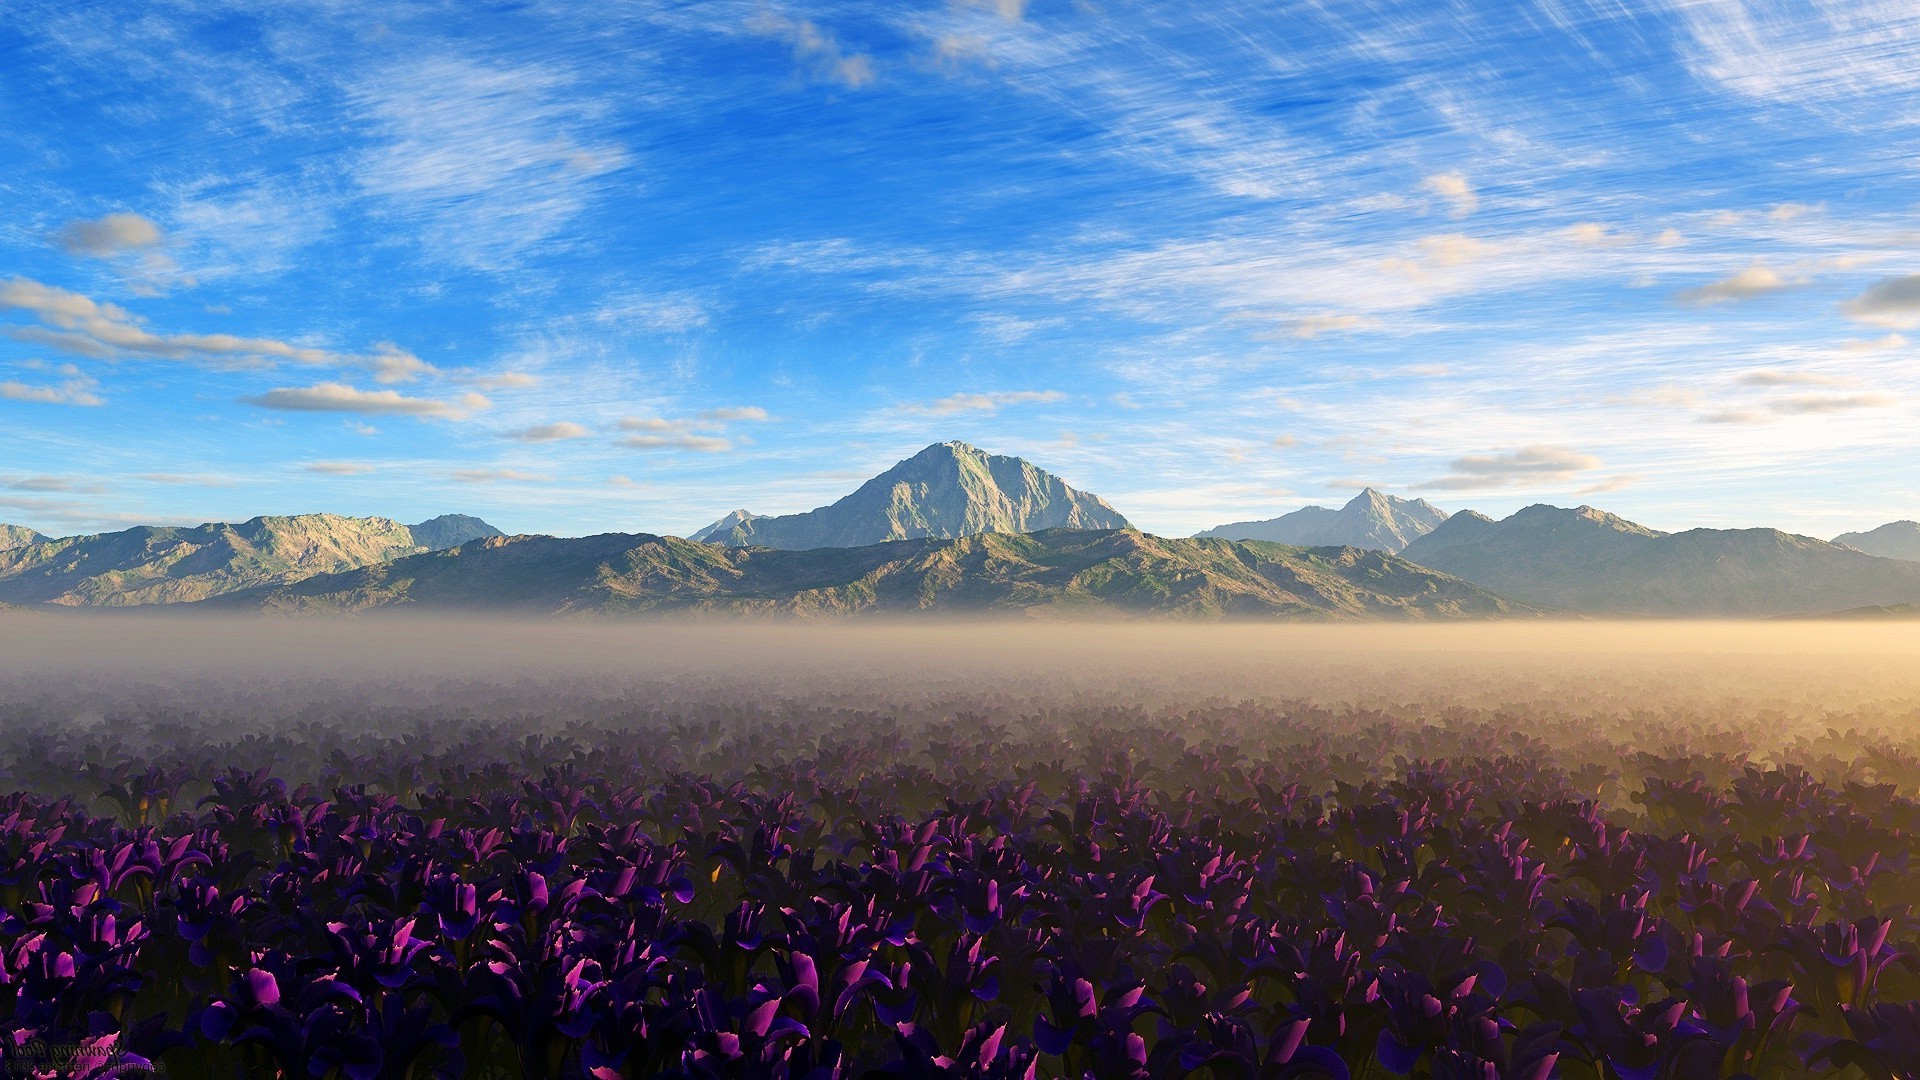 1920x1080  landscape flowers nature mountain purple flowers wallpaper and  background JPG 567 kB